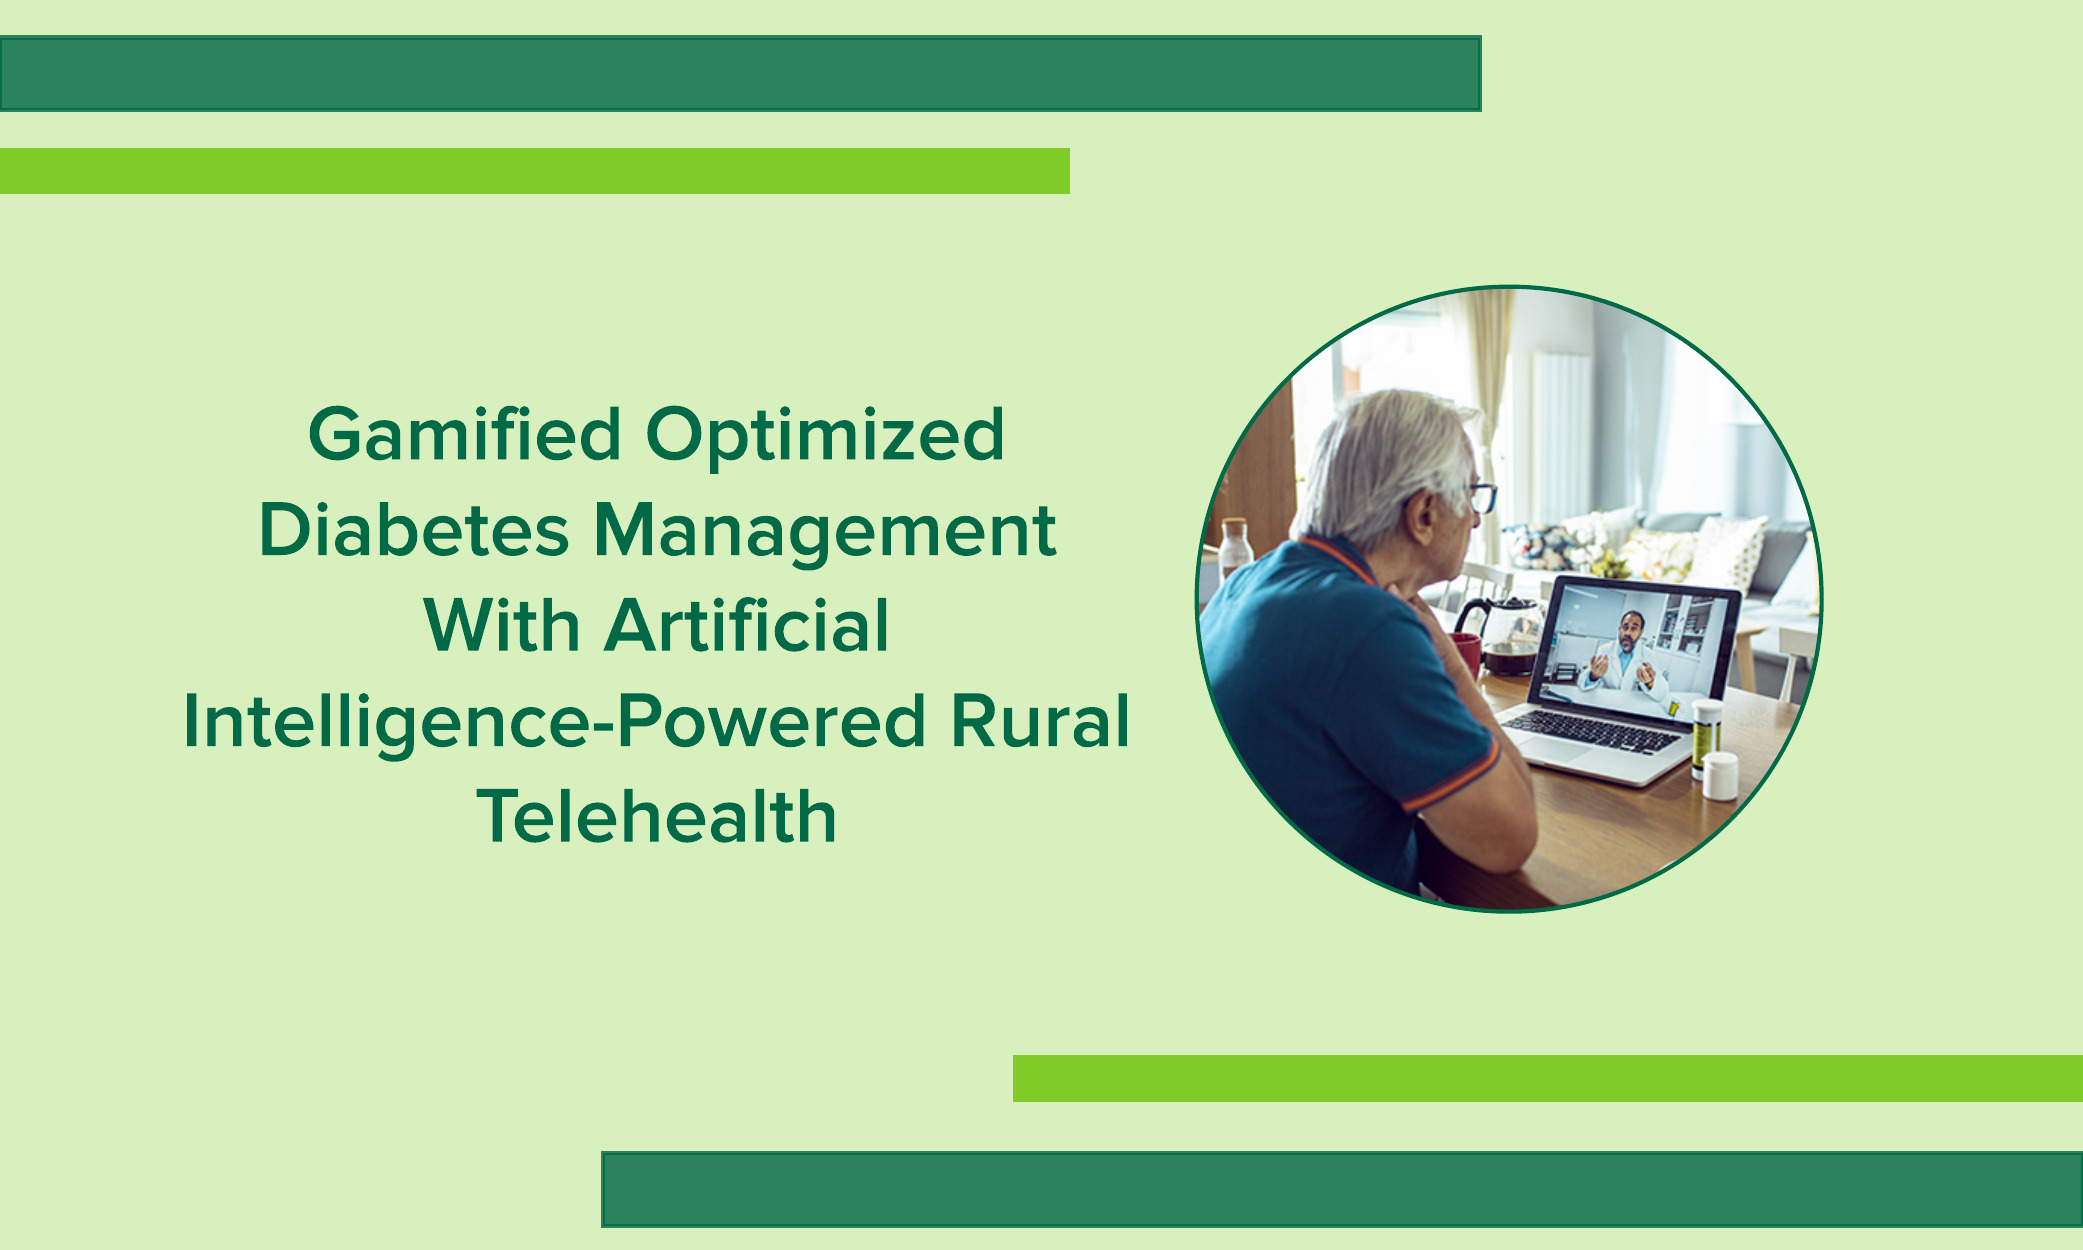 Gamified Optimized Diabetes Management With Artificial Intelligence-Powered Rural Telehealth (GODART)